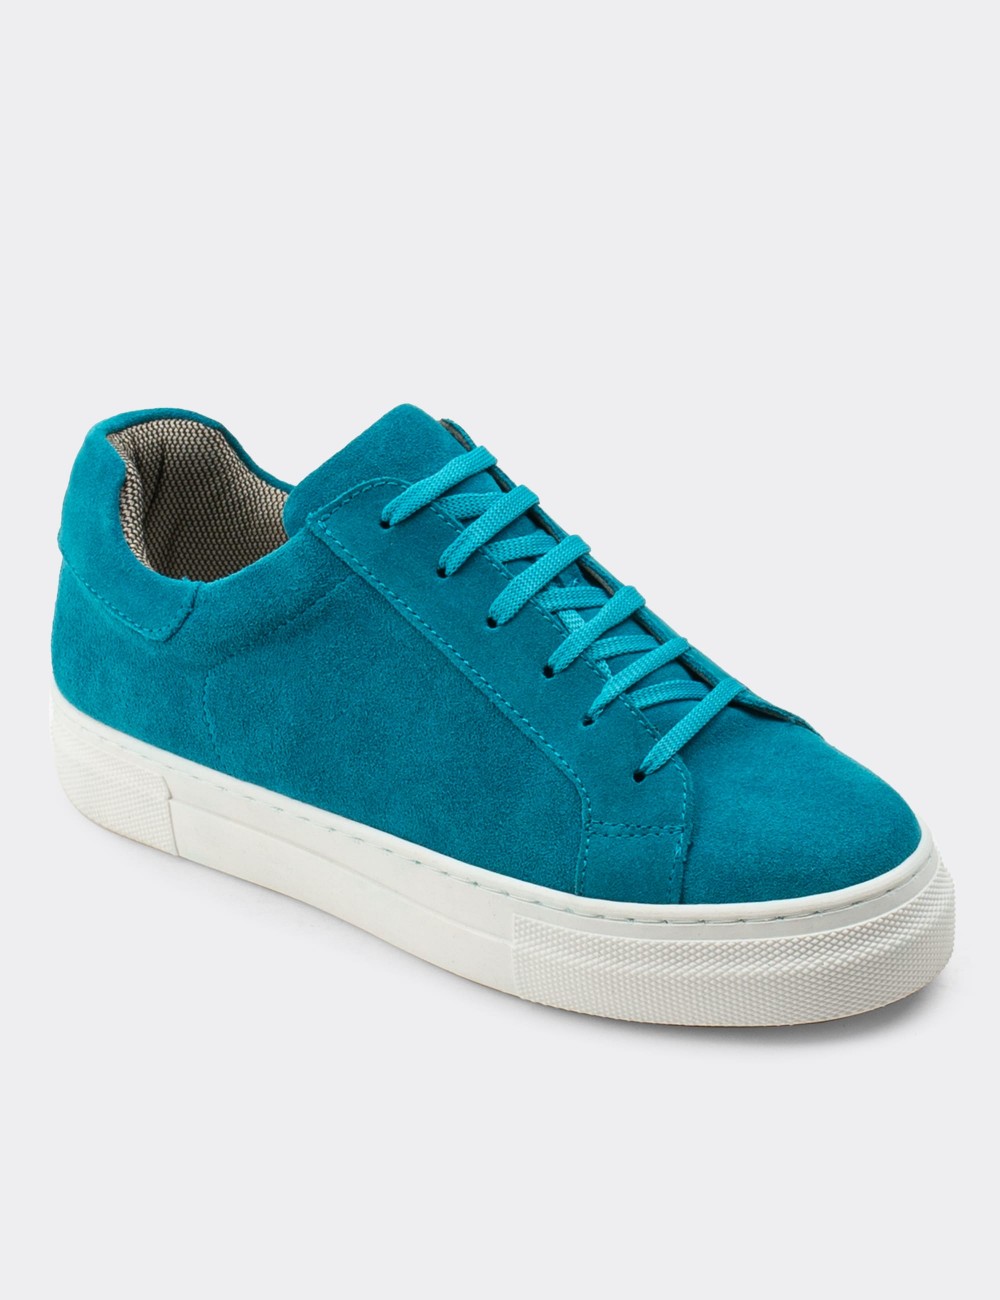 Turquoise Suede Leather Sneakers - Z1681ZTRKC01